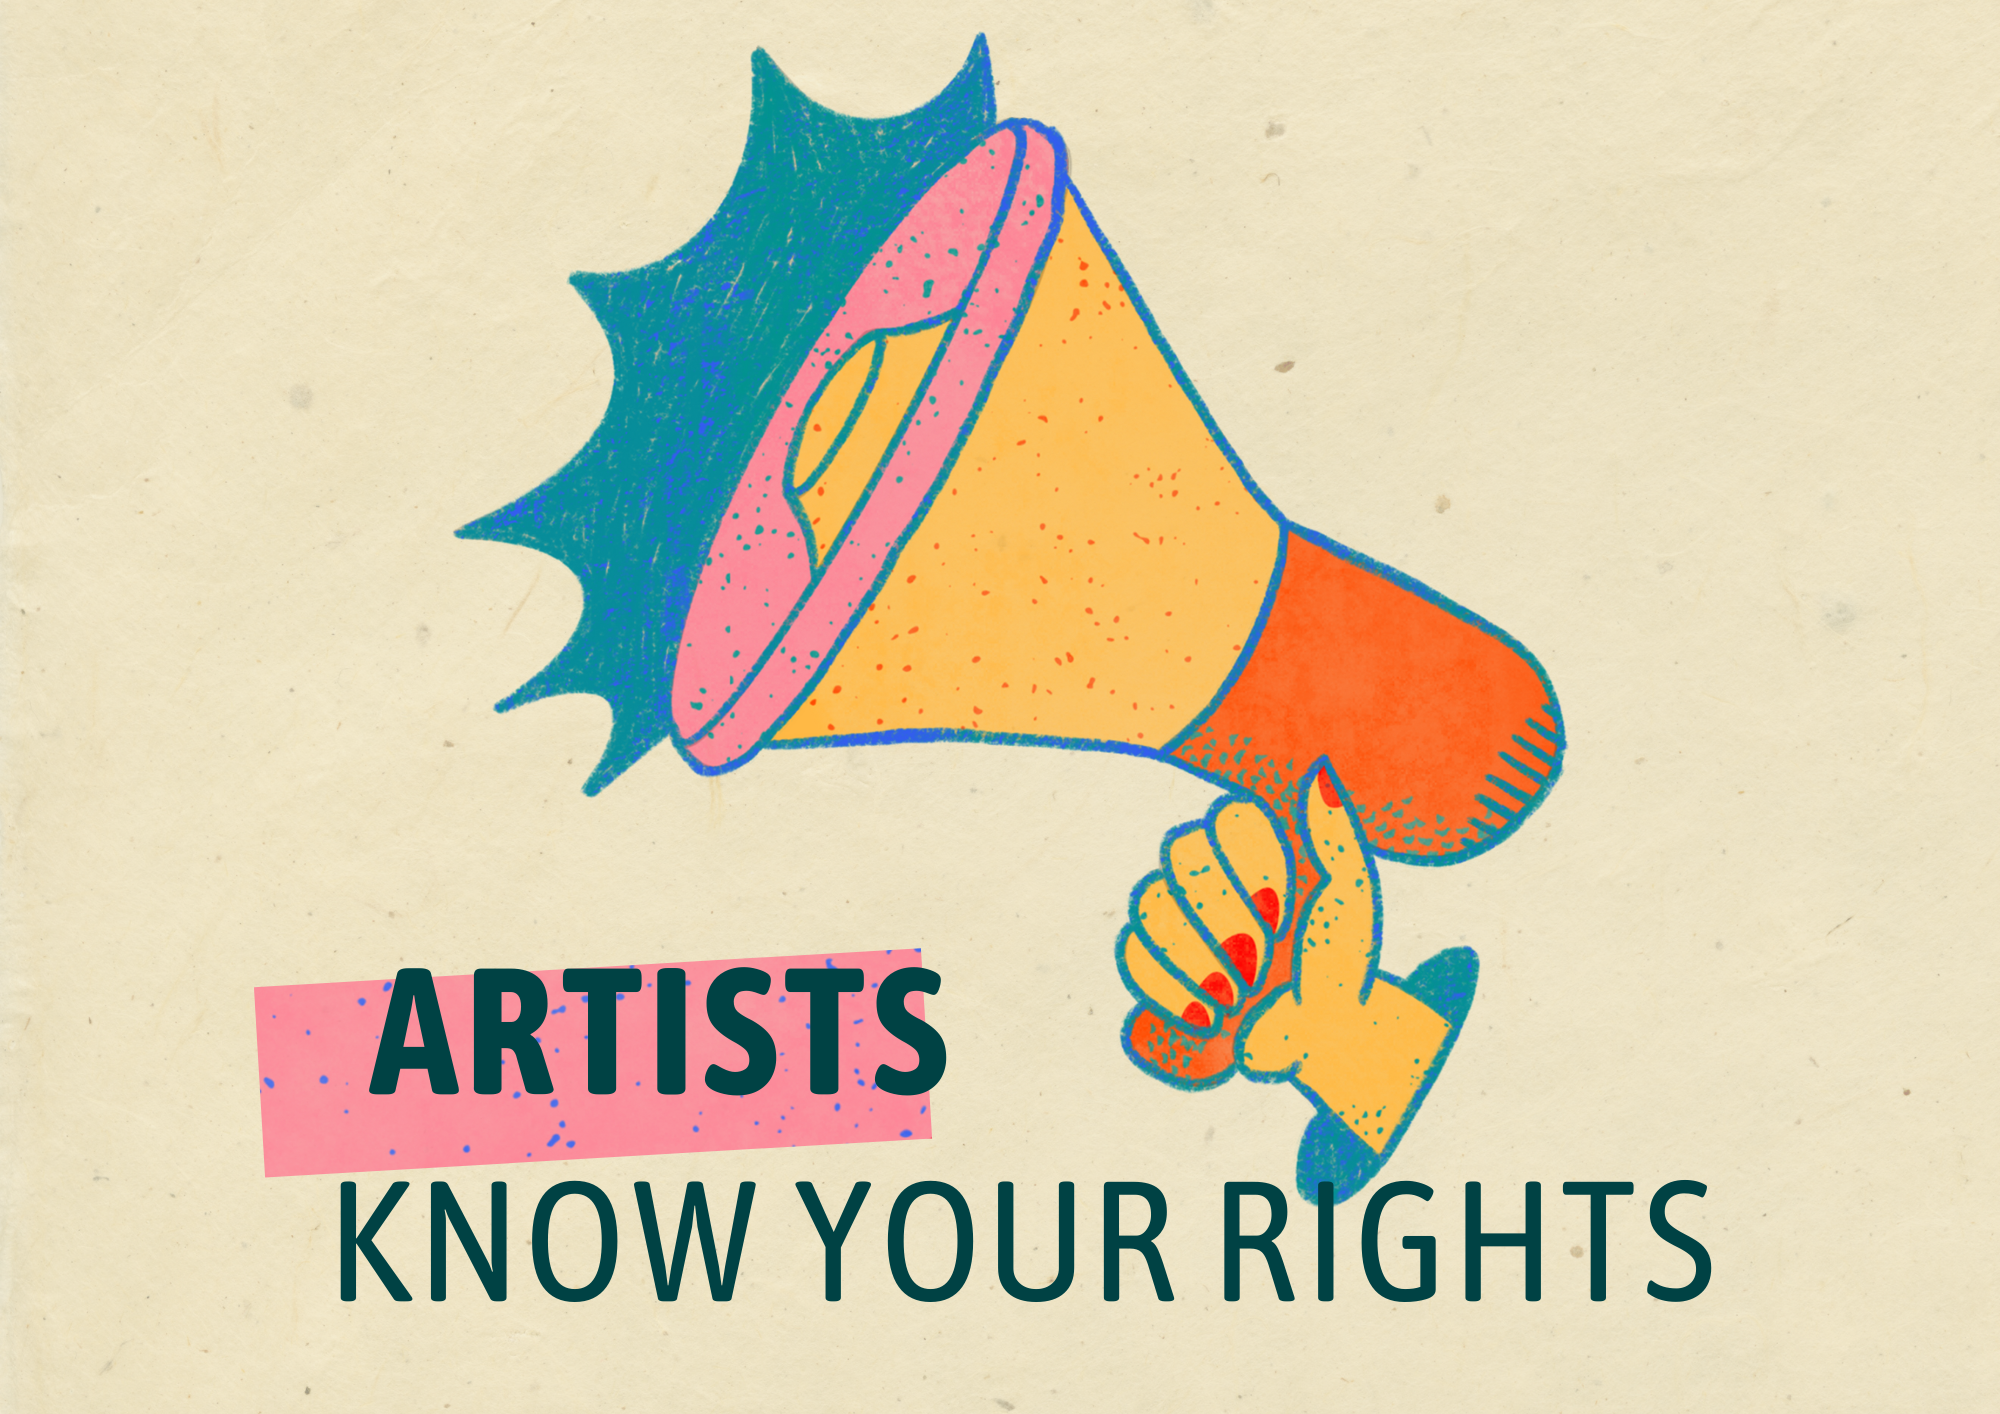 An illustration of a hna dholding a megaphone with text underneath that reads Artists KNOW YOUR RIGHTS